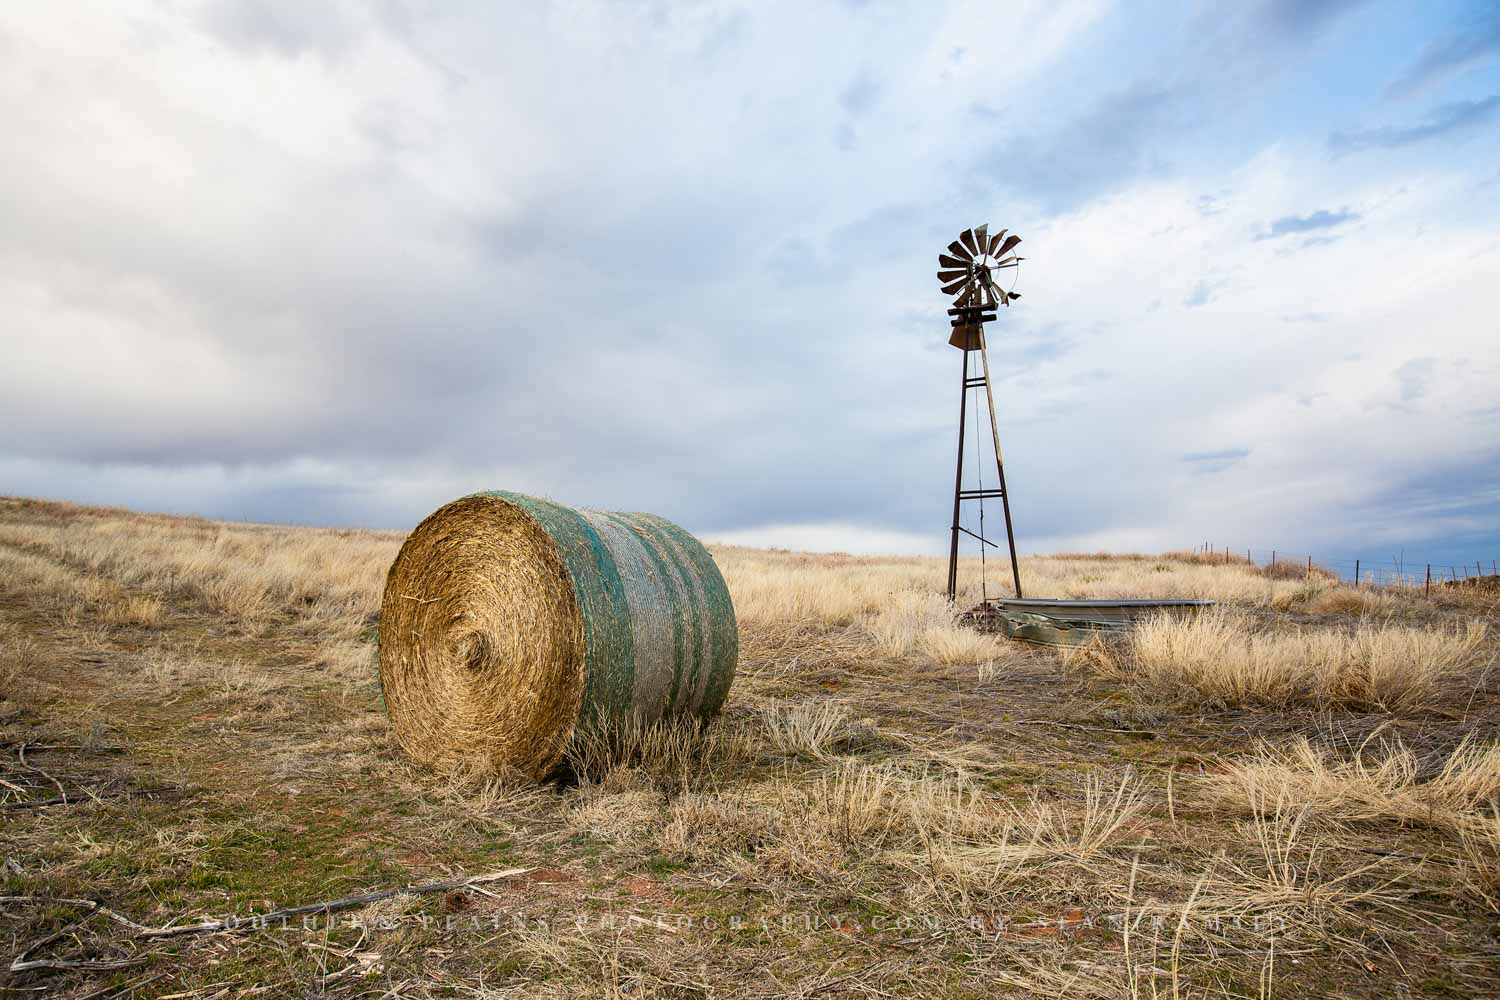 Country photography print of an old windmill and round hay bale on an autumn day on the Oklahoma prairie by Sean Ramsey of Southern Plains Photography.